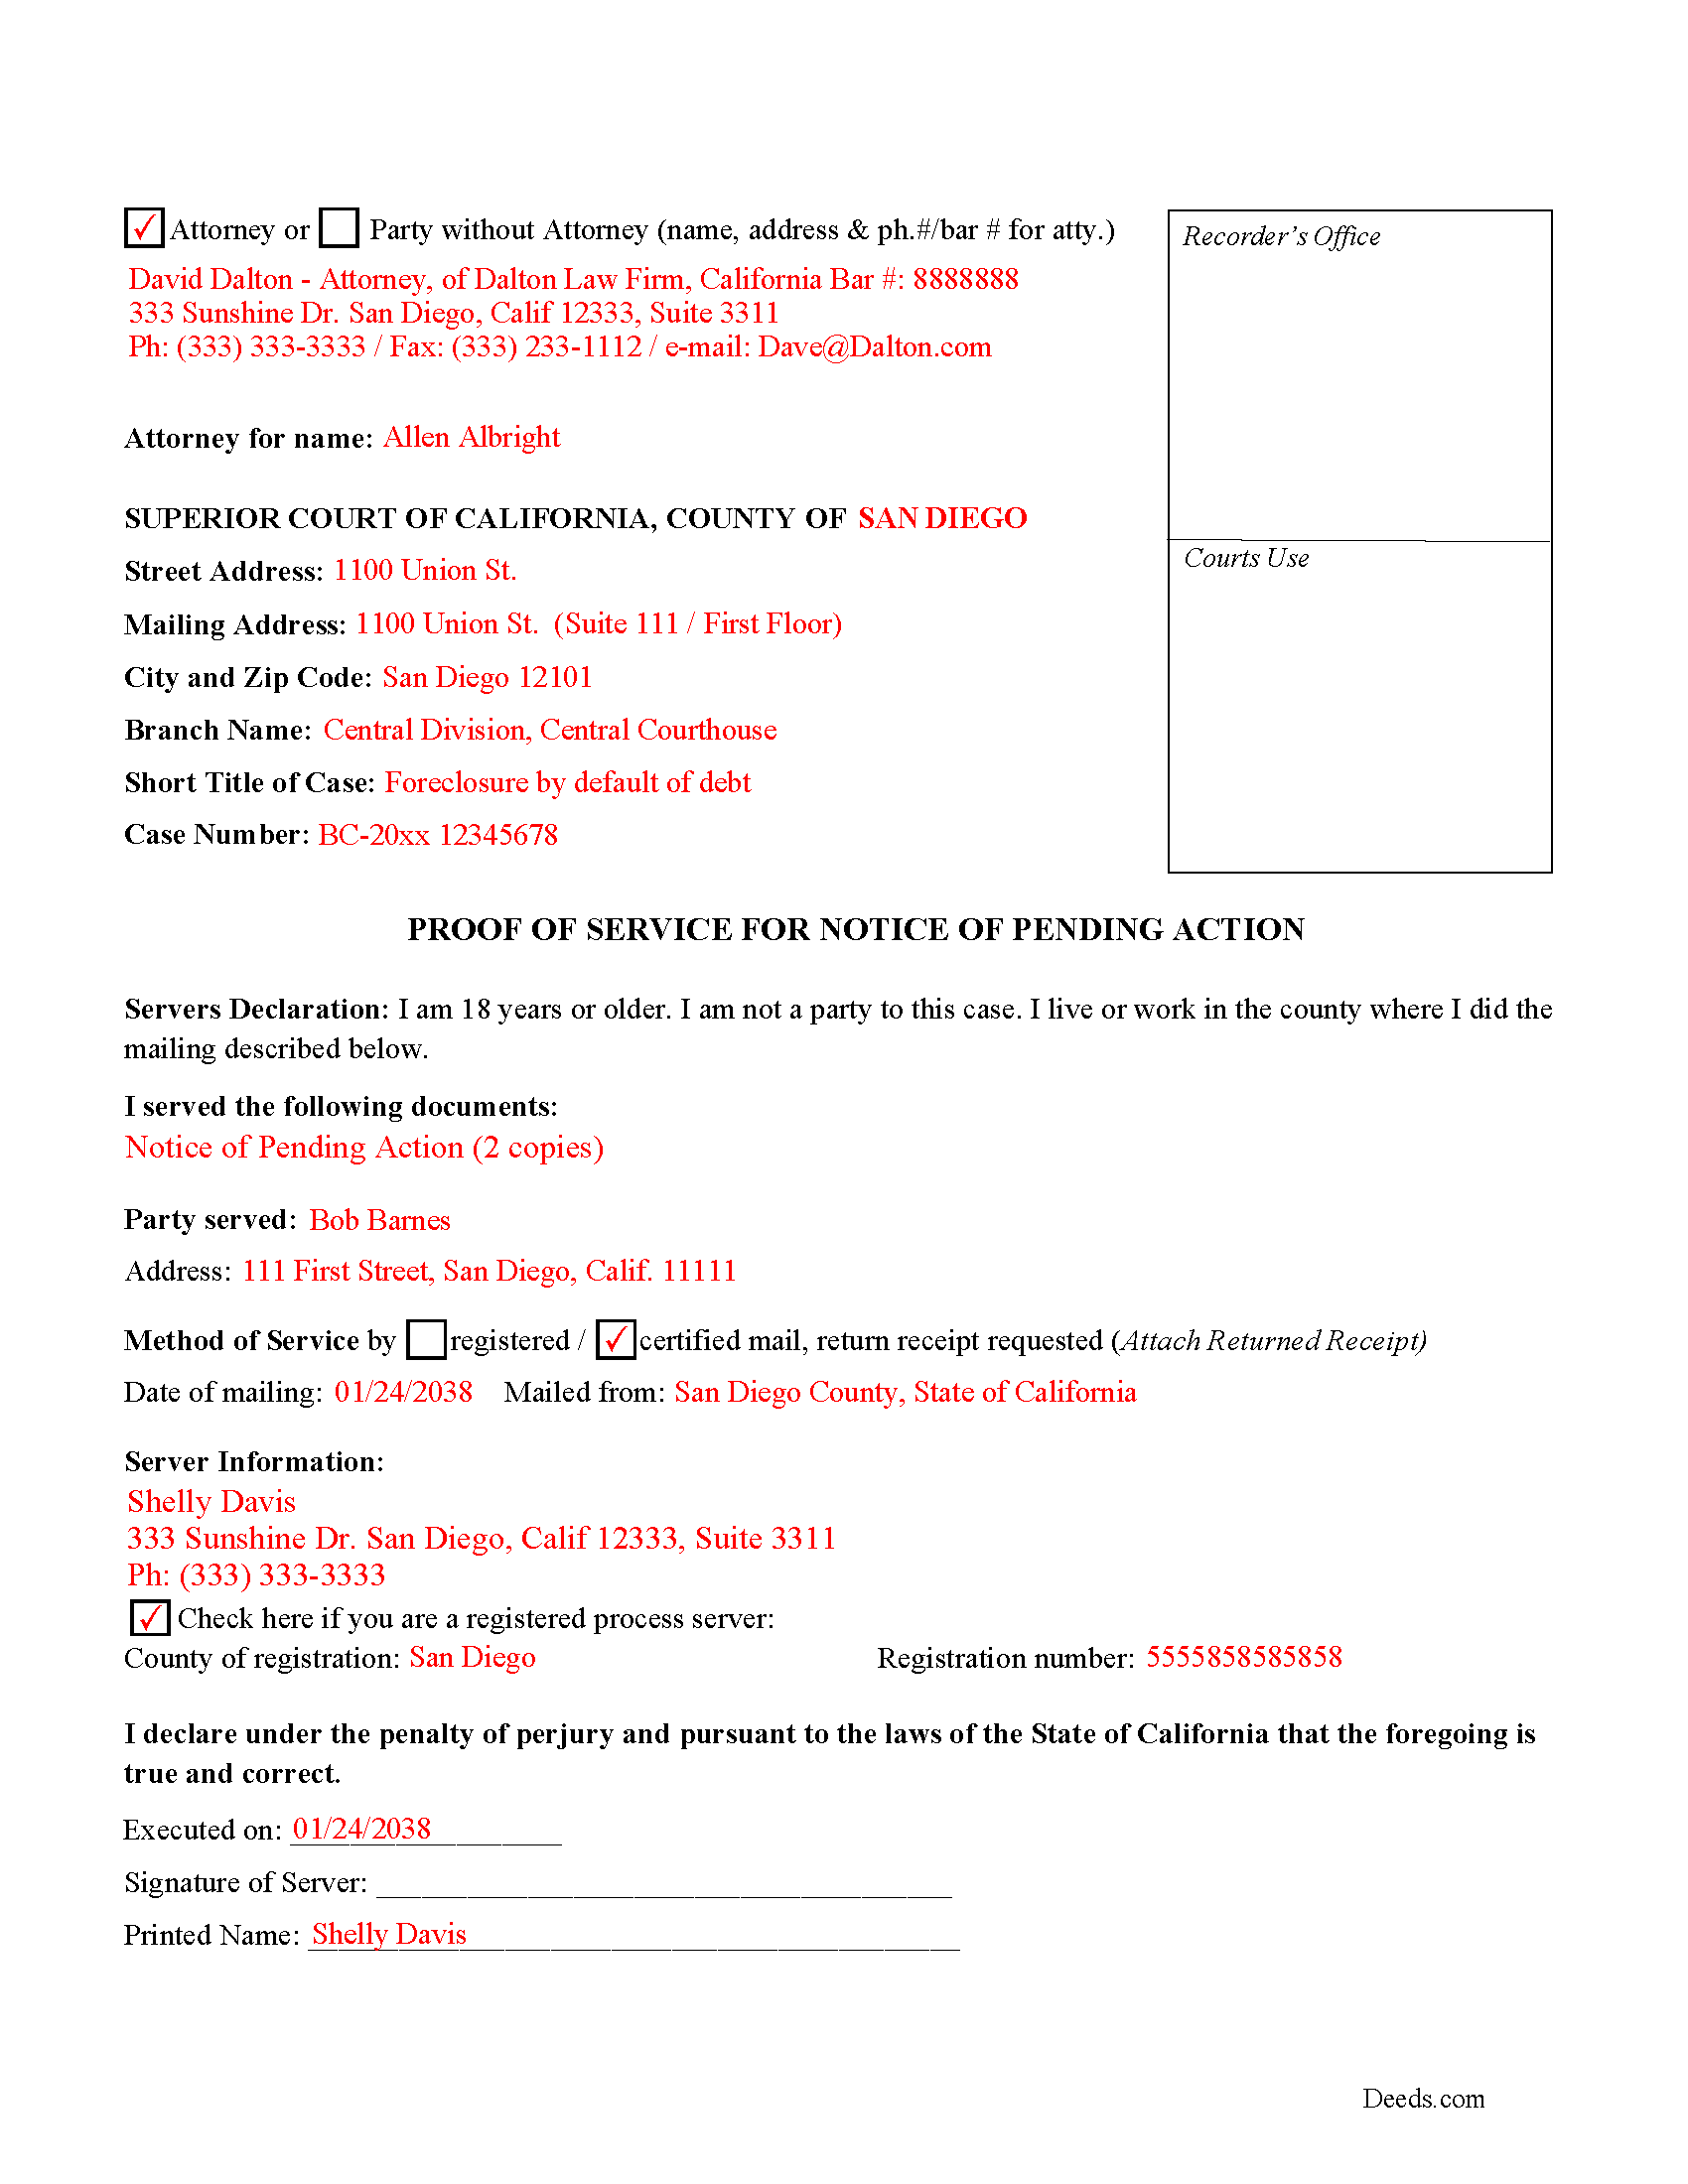 Completed Example of the Proof of Service Document